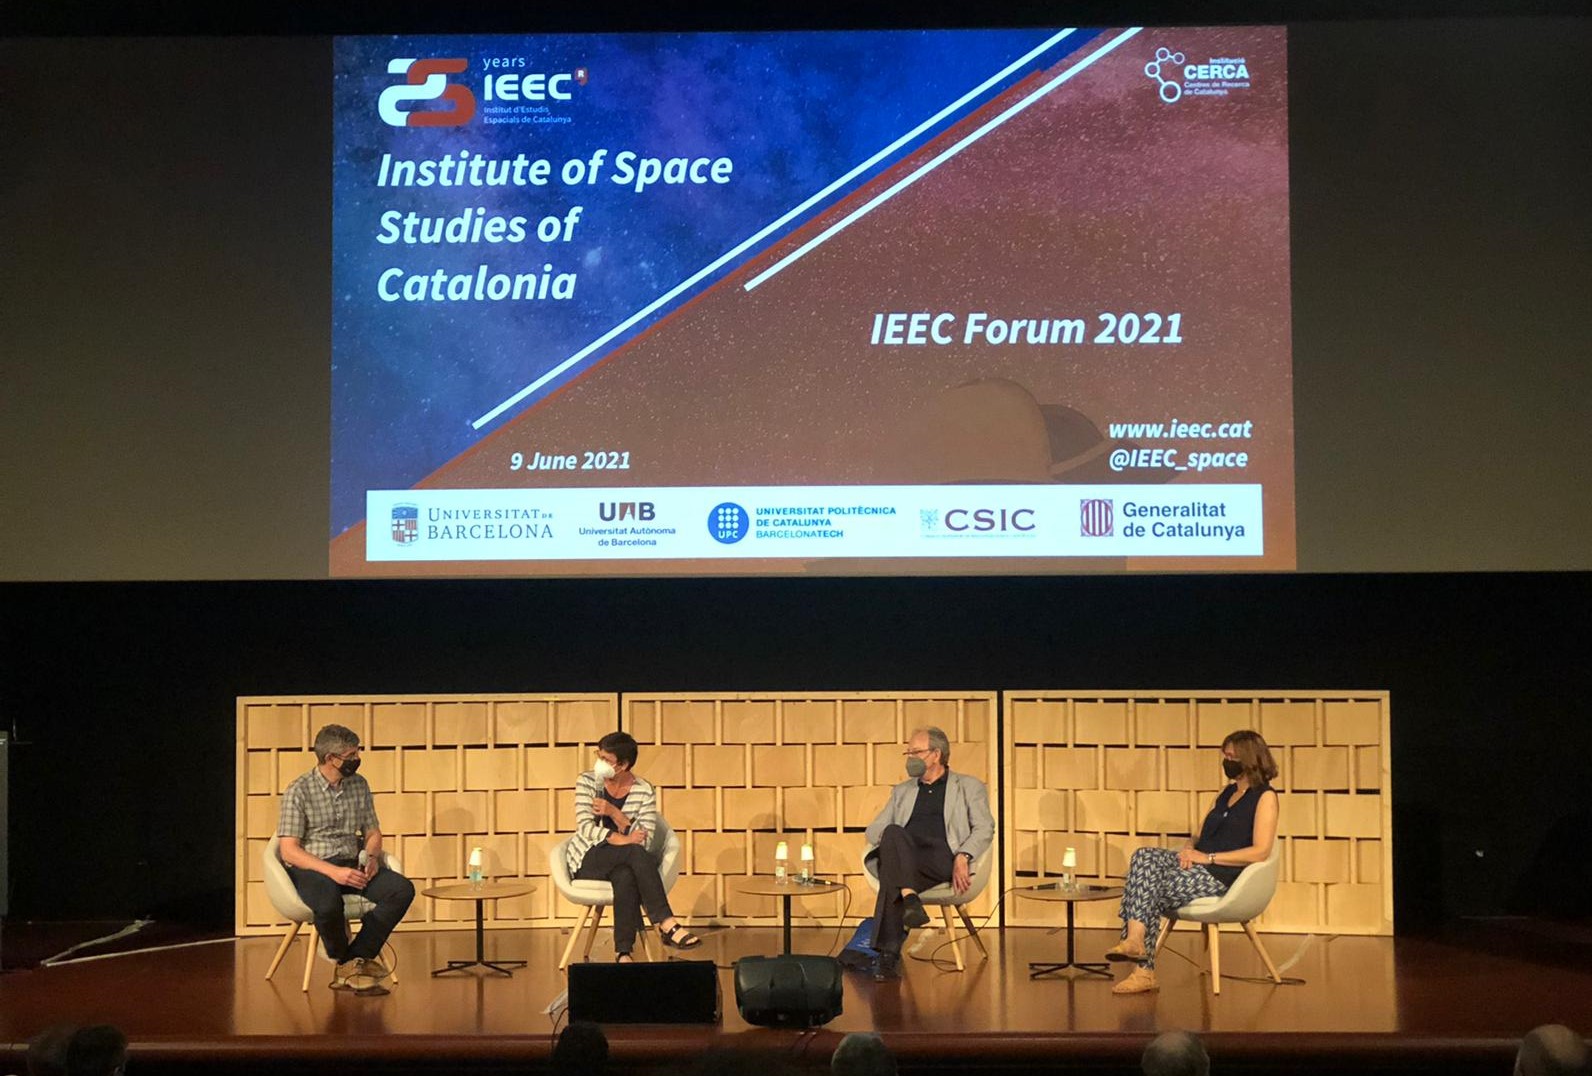 The IEEC Forum 2021, on its 25th anniversary